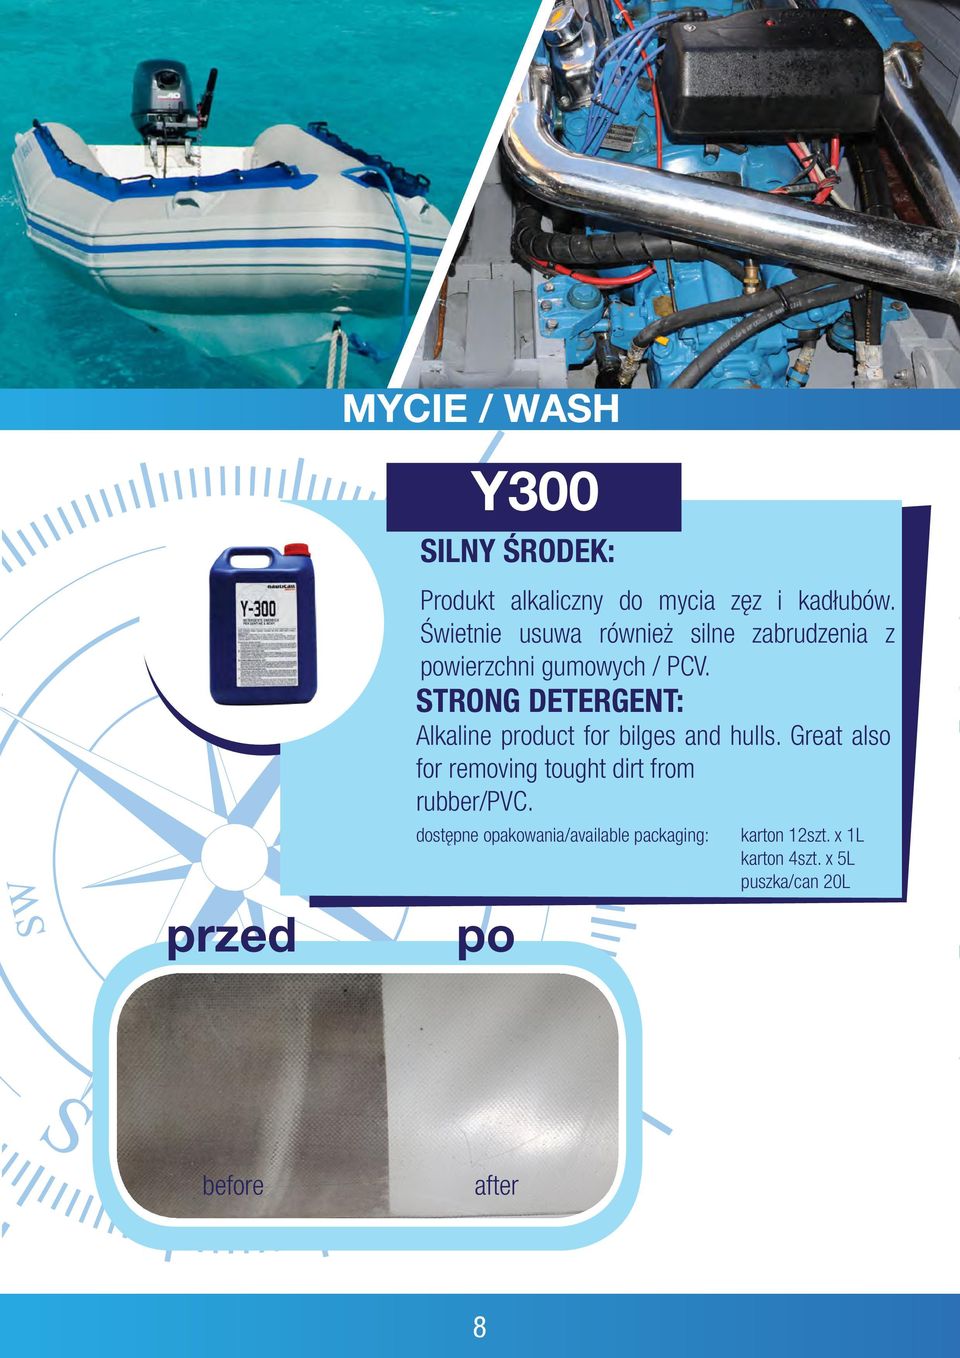 STRONG DETERGENT: Alkaline product for bilges and hulls.